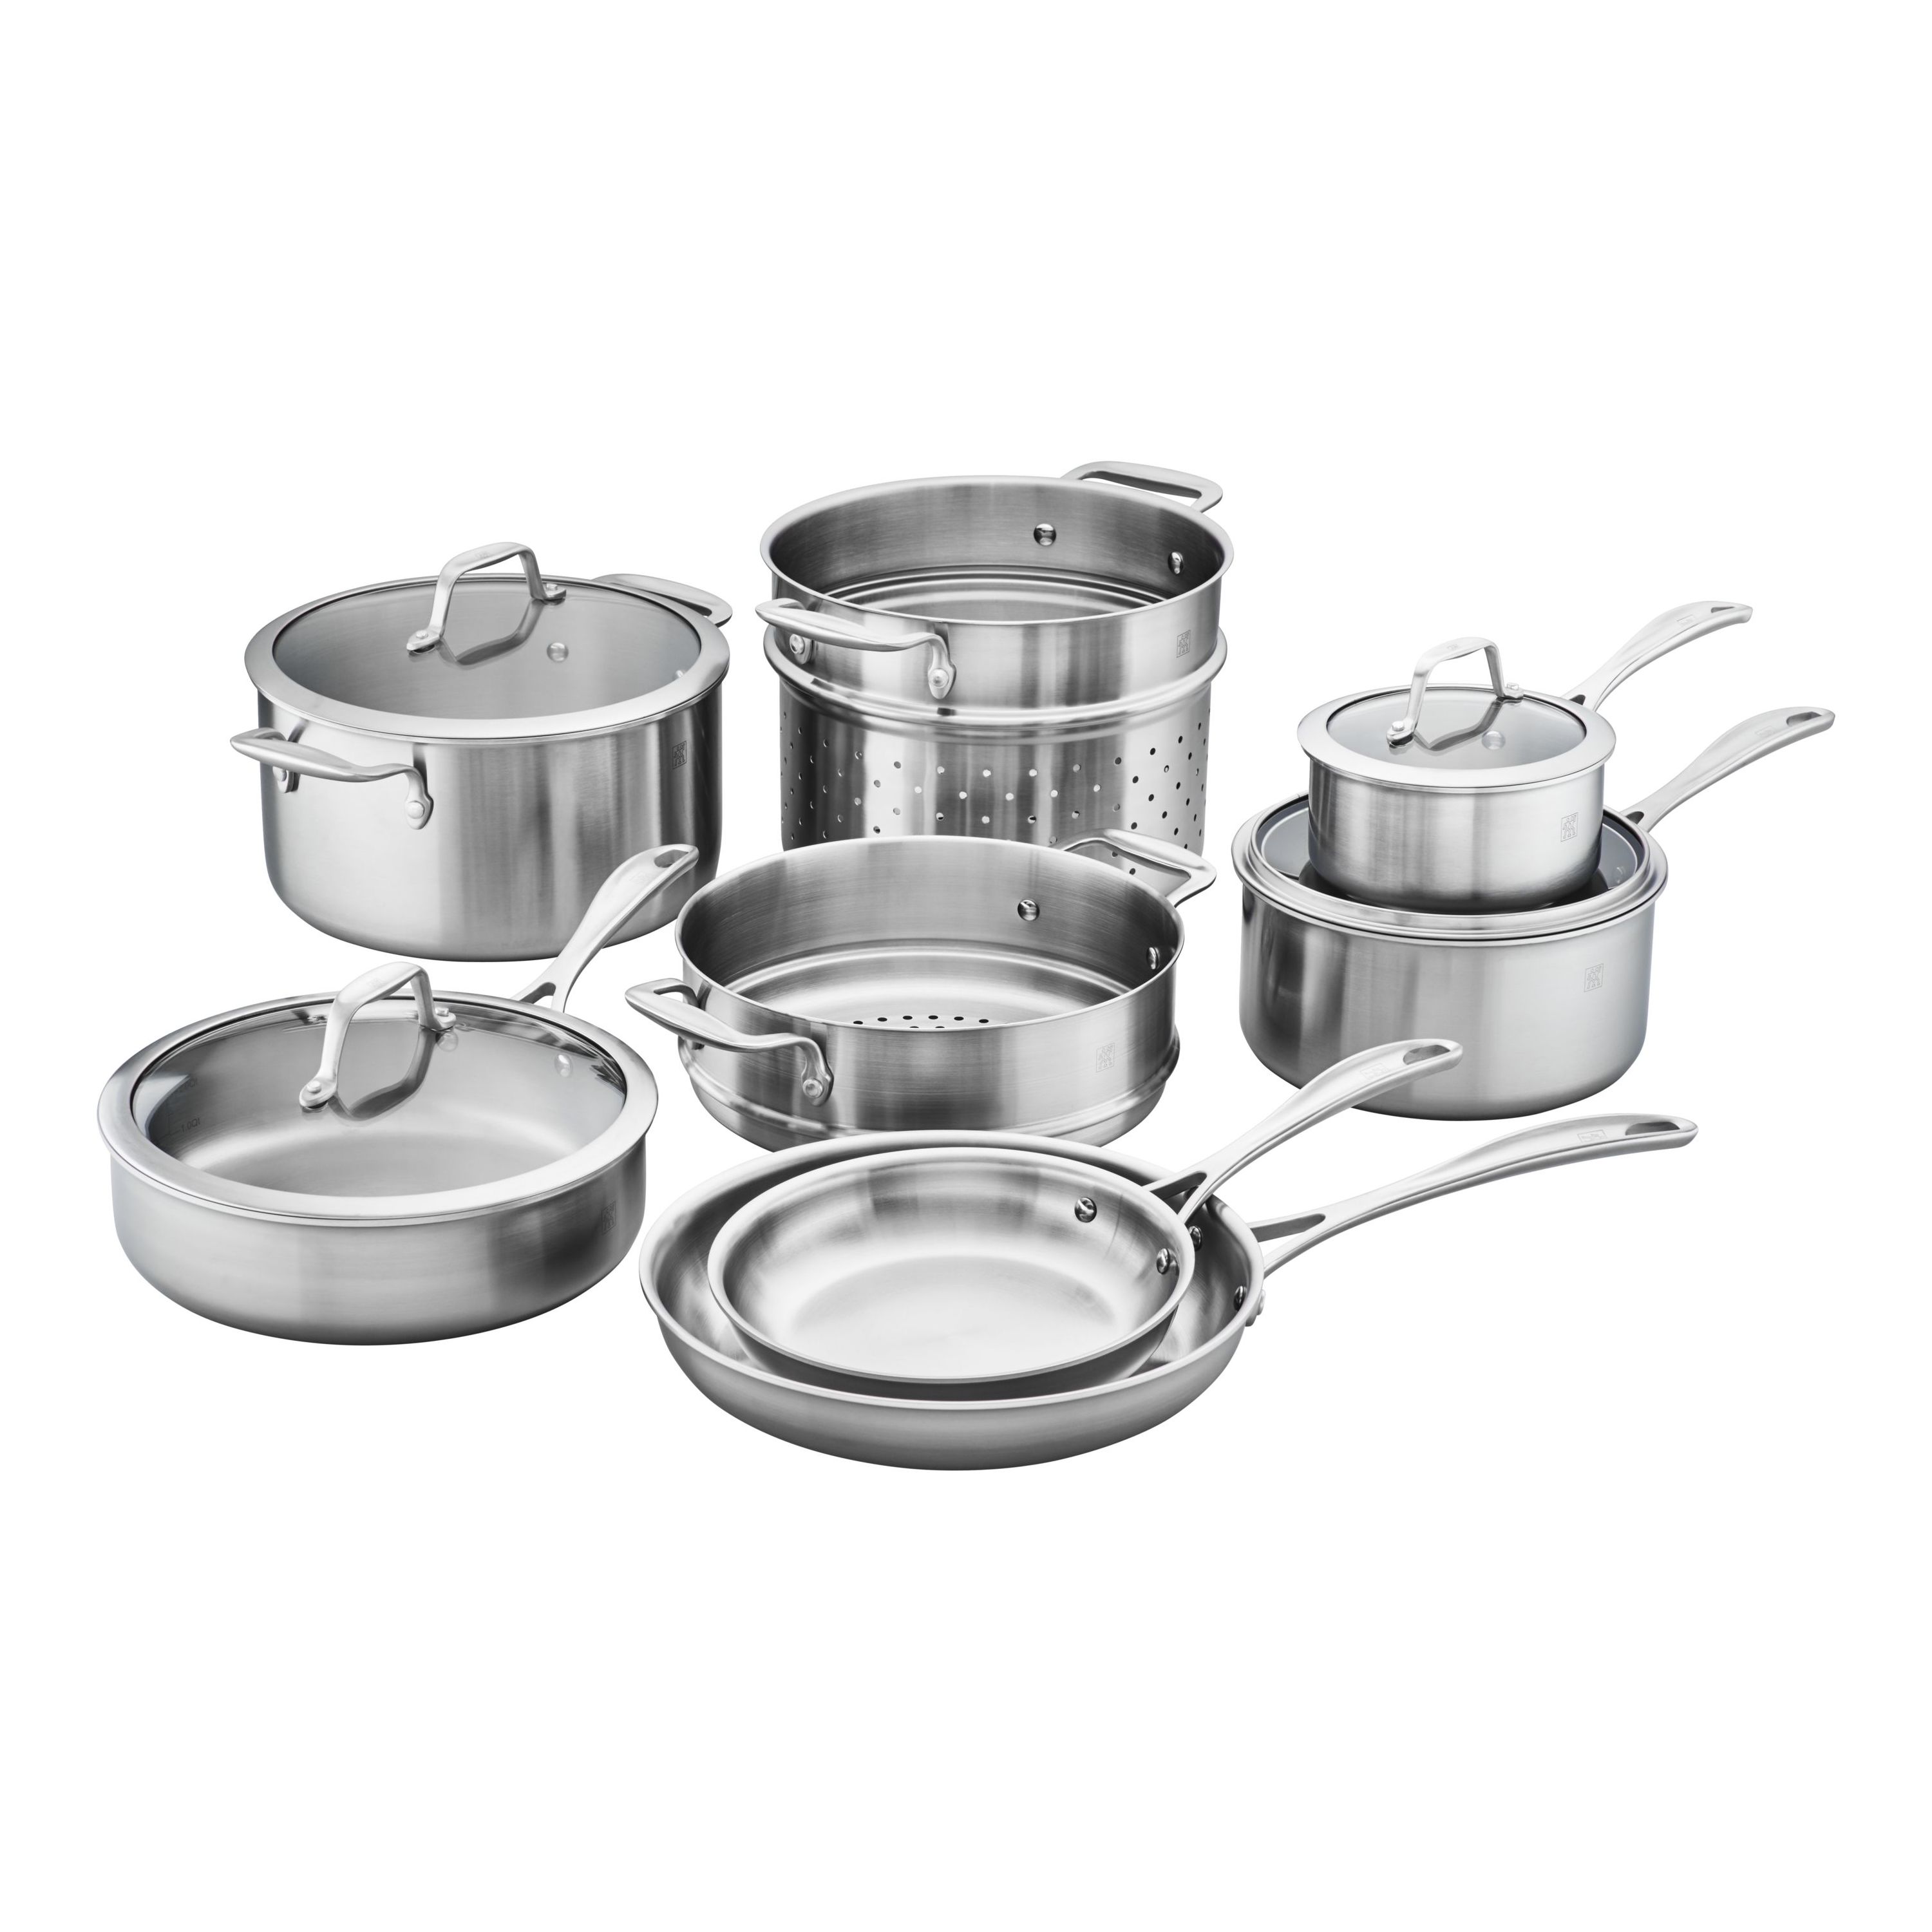 put stainless steel pot in oven